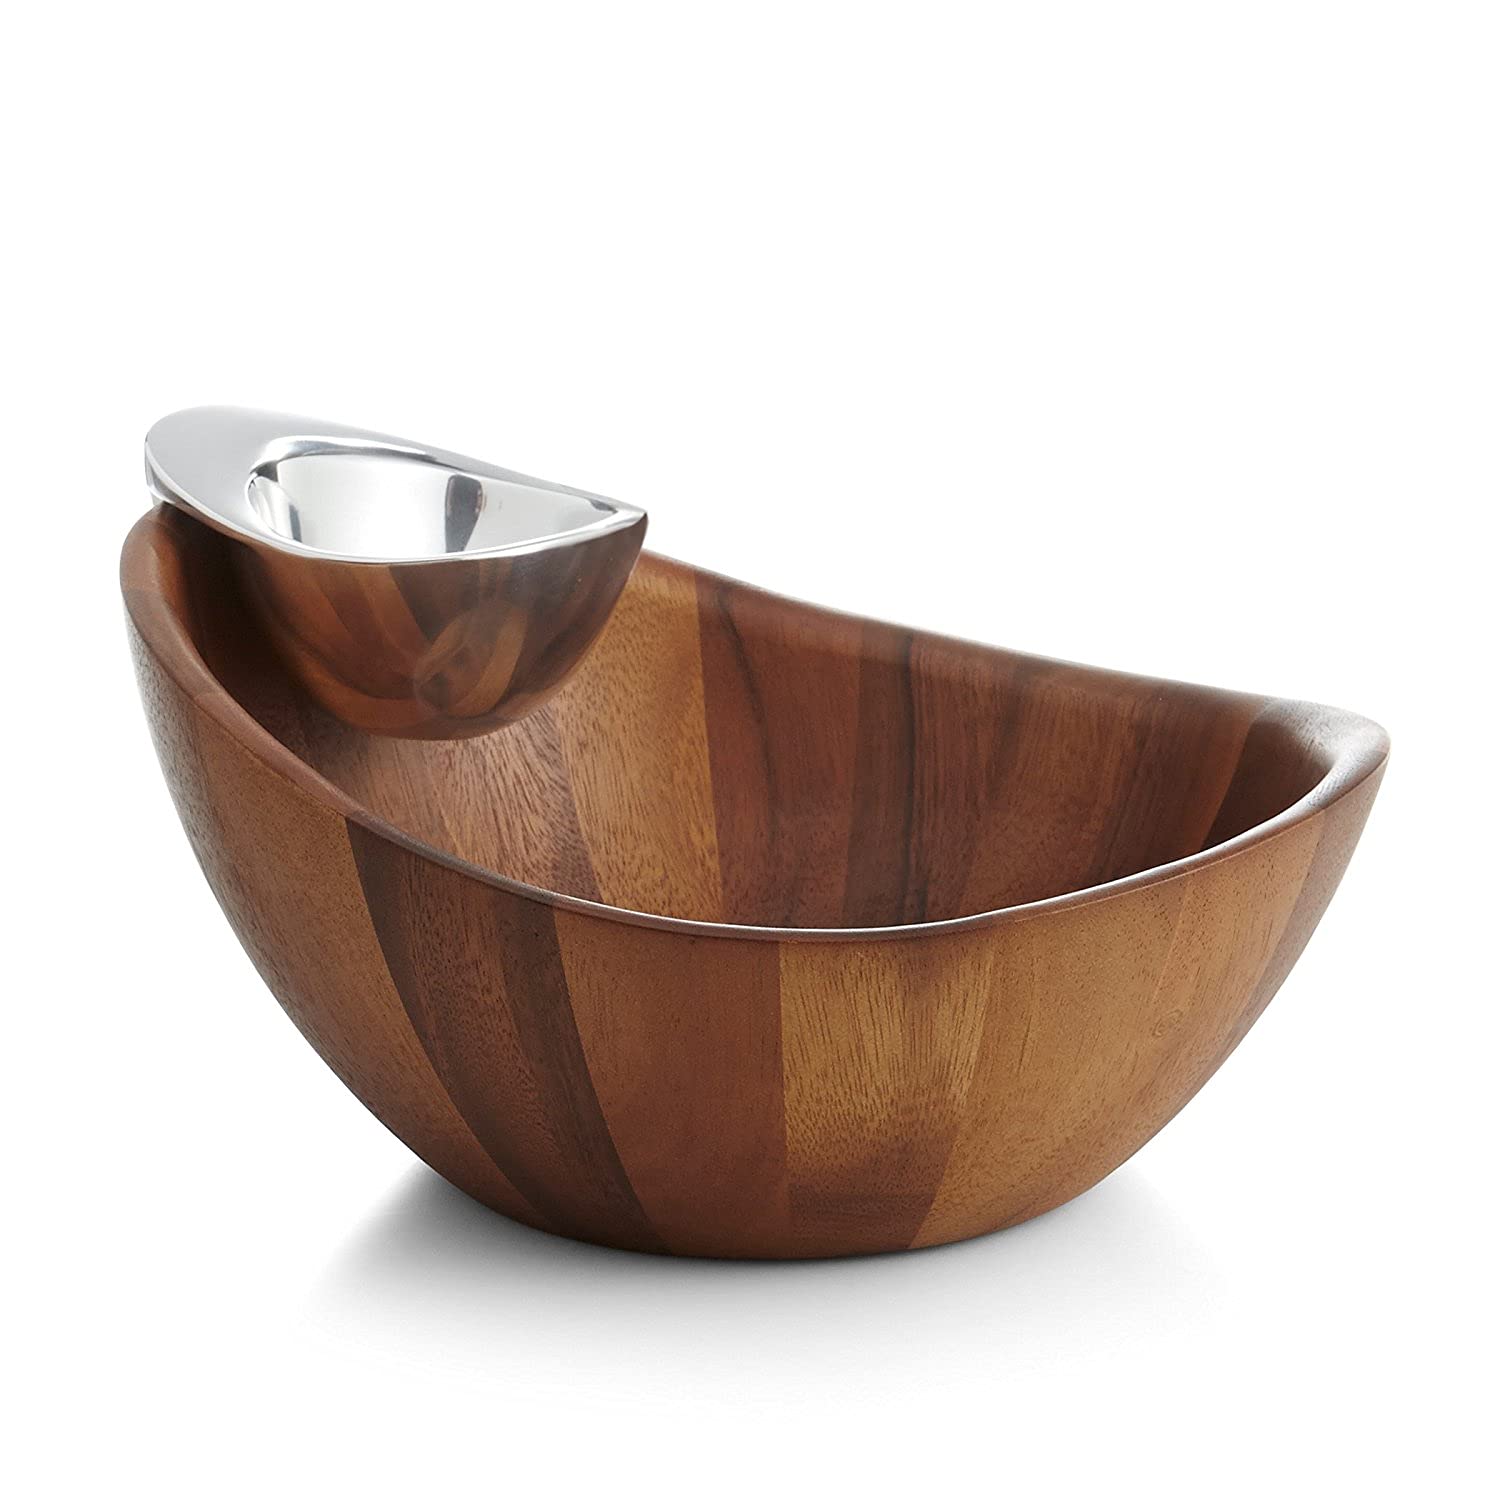 Harmony Chip and Dip Bowl - Measures at 12" x 6.5" - Made with Acacia Wood and Nambe Alloy